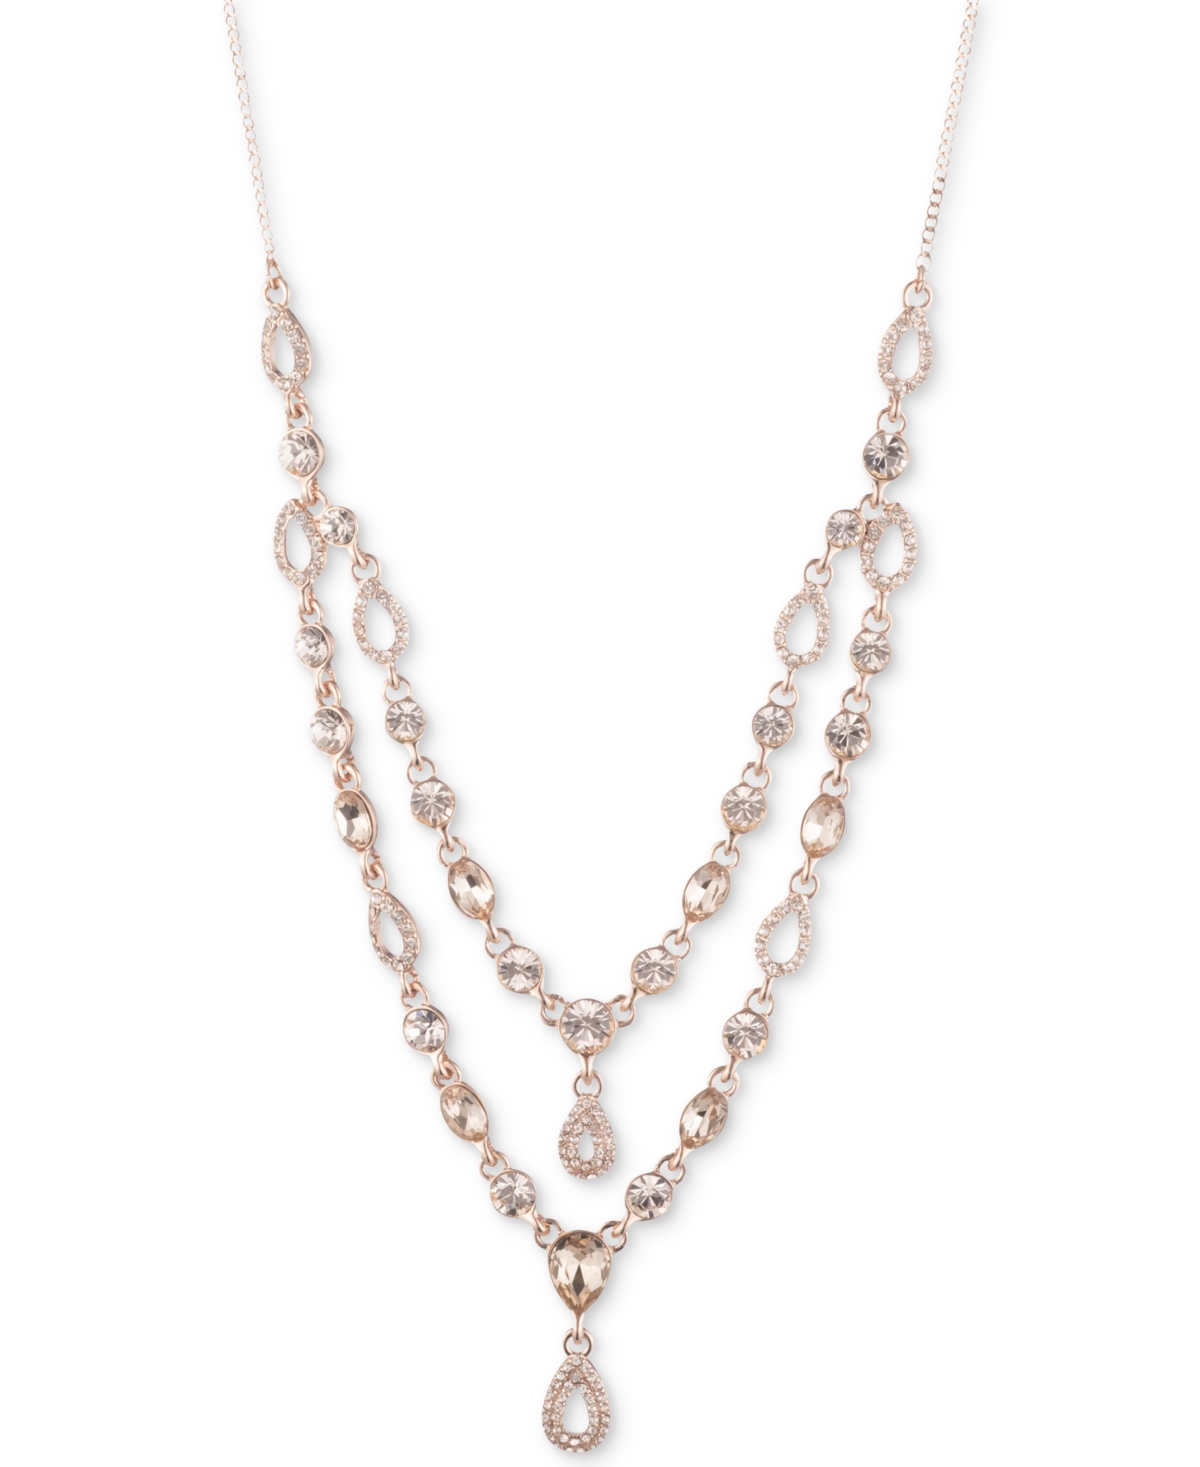 Givenchy Rose Gold-Tone Crystal 2-Row Frontal Necklace, 18" + 3"